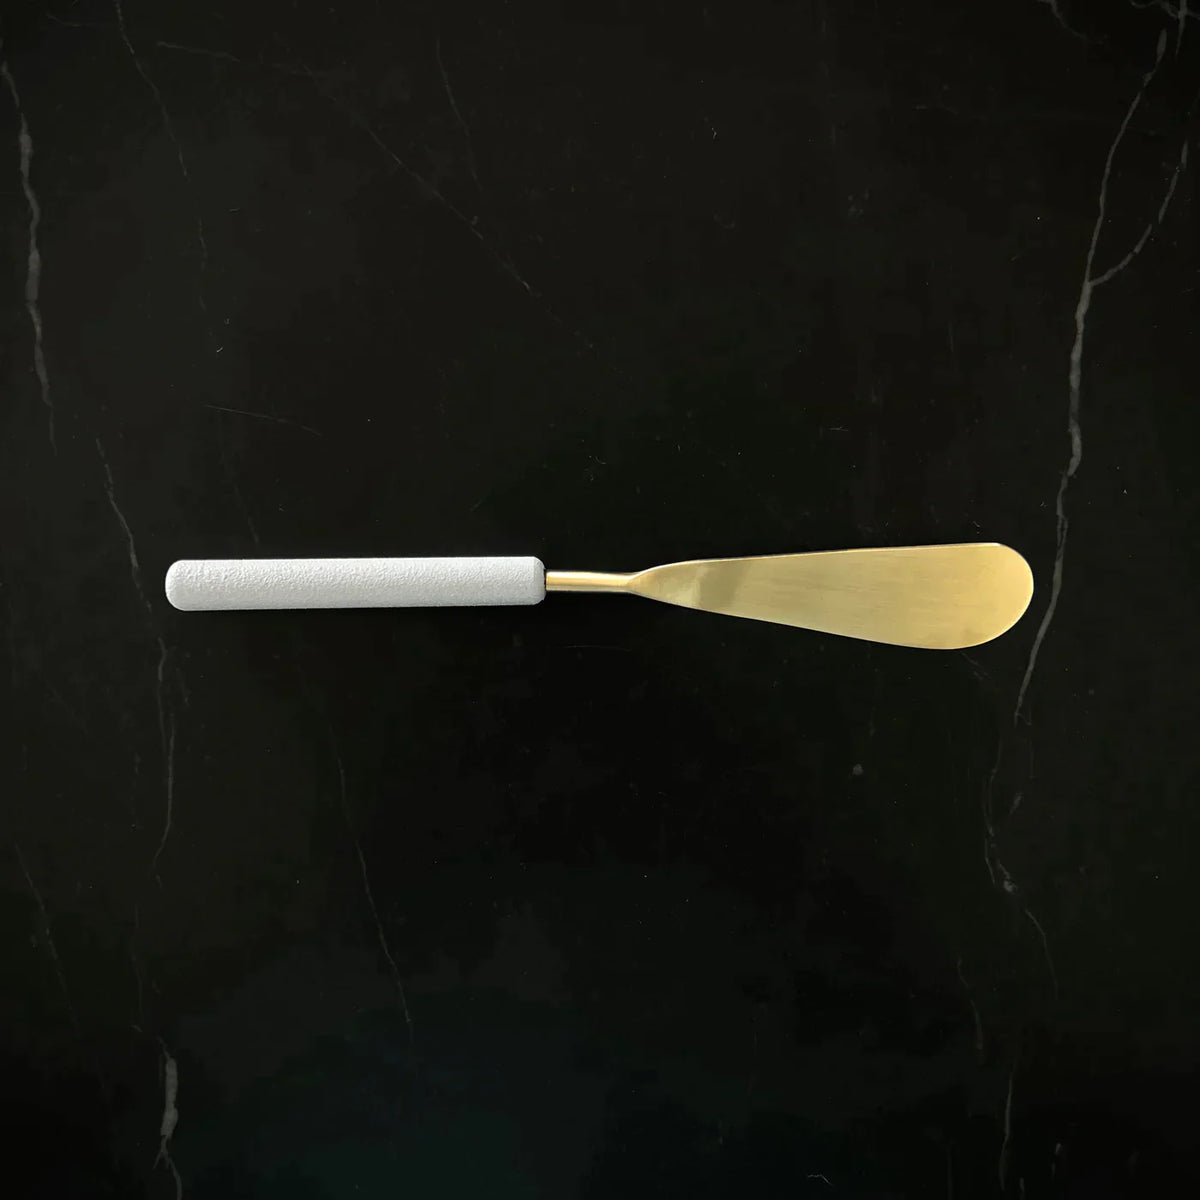 Blanco Pate/Butter Knife - Gold - Humble & Grand Homestore